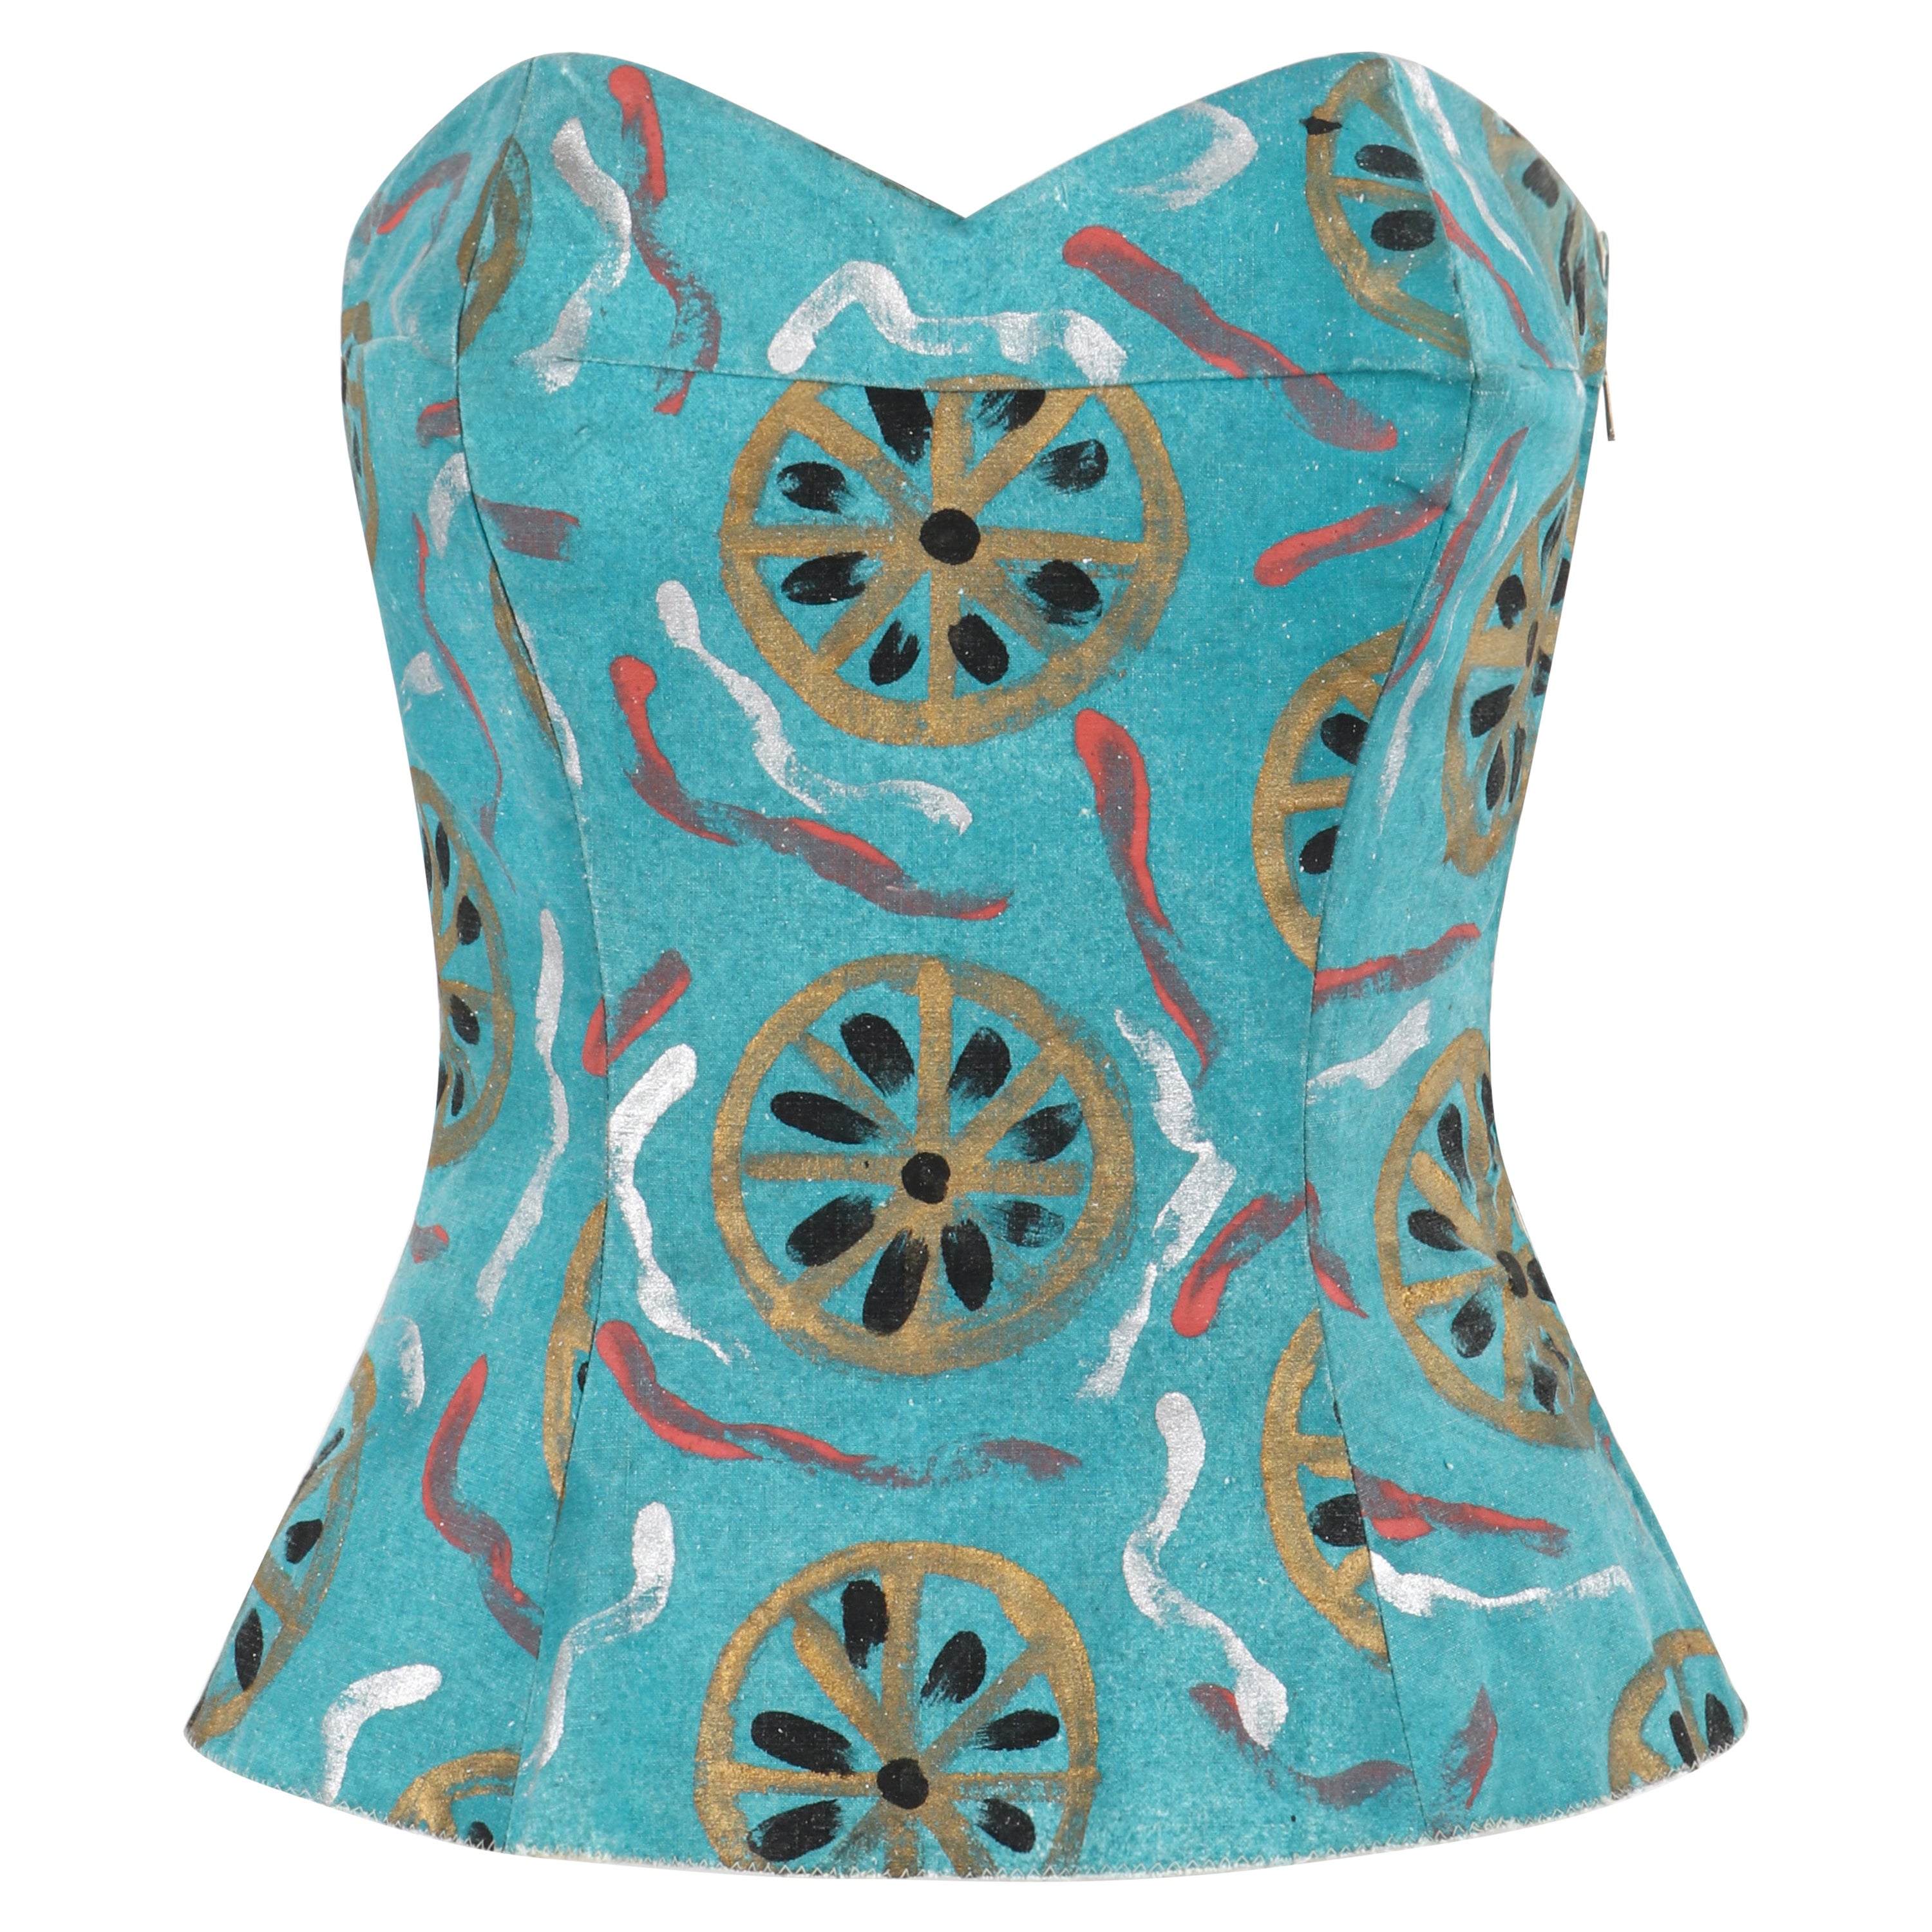 EMILIO PUCCI c.1954 Vtg Teal Cotton Fitted Hand Painted Bustier Sun Top RARE For Sale